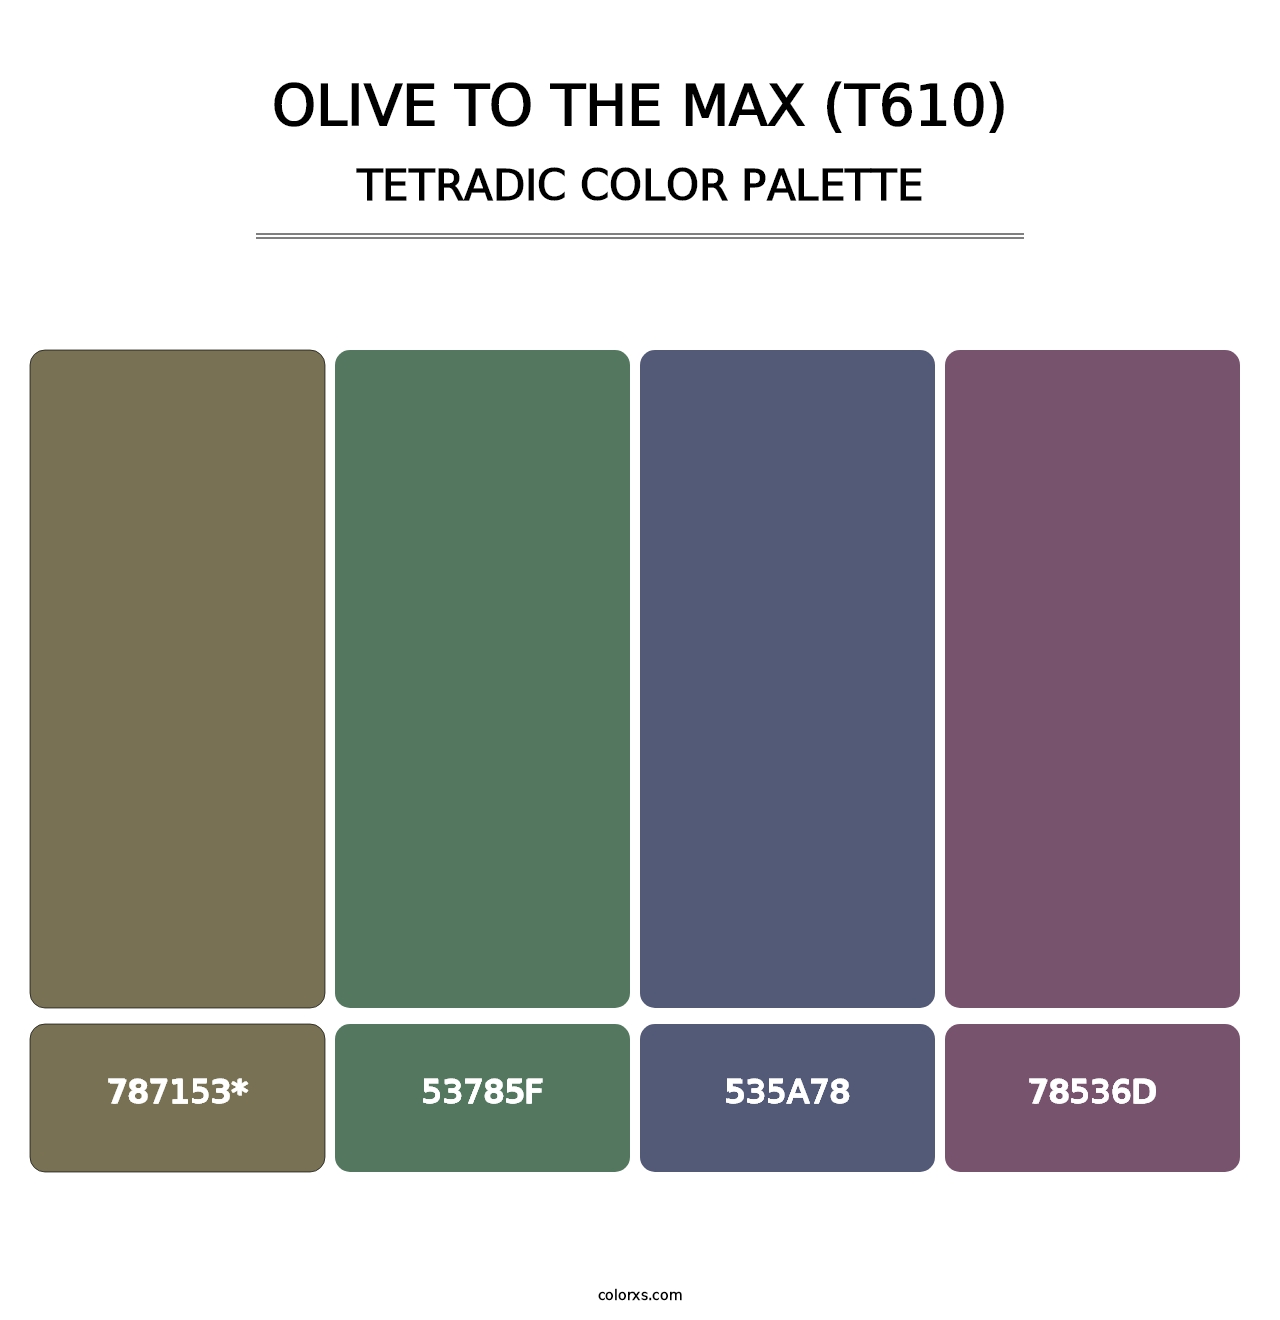 Olive to the Max (T610) - Tetradic Color Palette